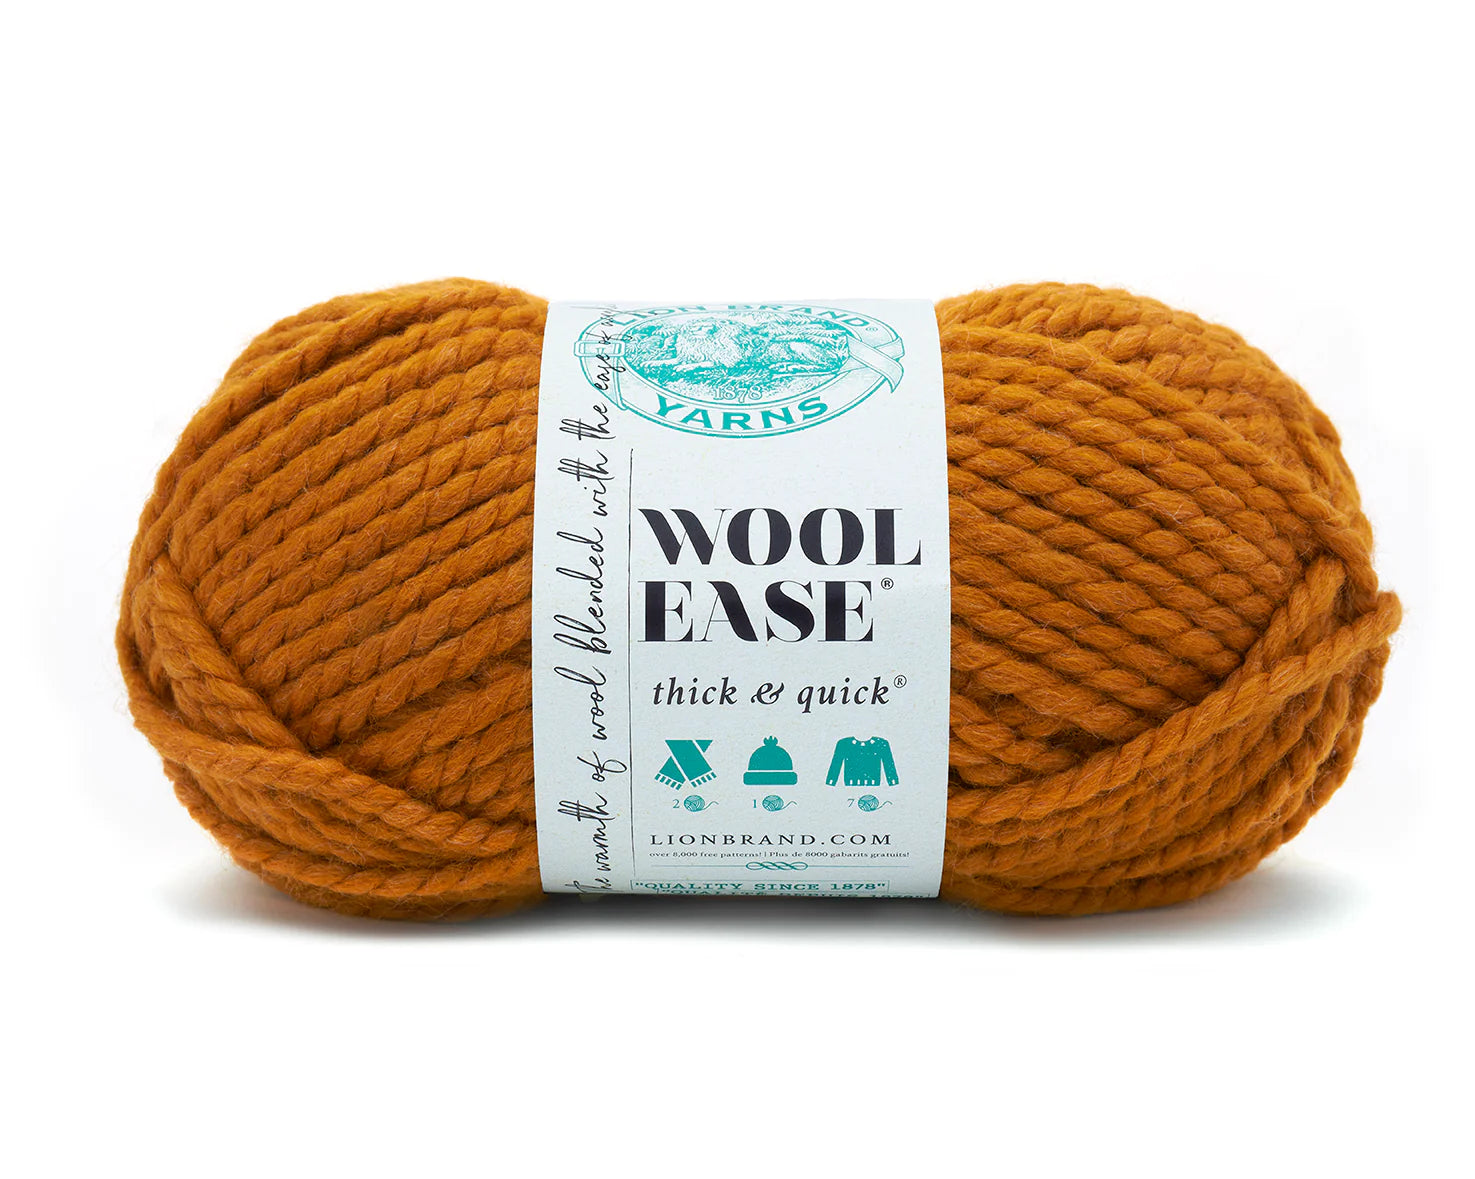 Lion Brand Yarn Wool-Ease Thick & Quick Yarn, Soft and Bulky Yarn for  Knitting, Crocheting, and Crafting, 1 Skein, City Lights